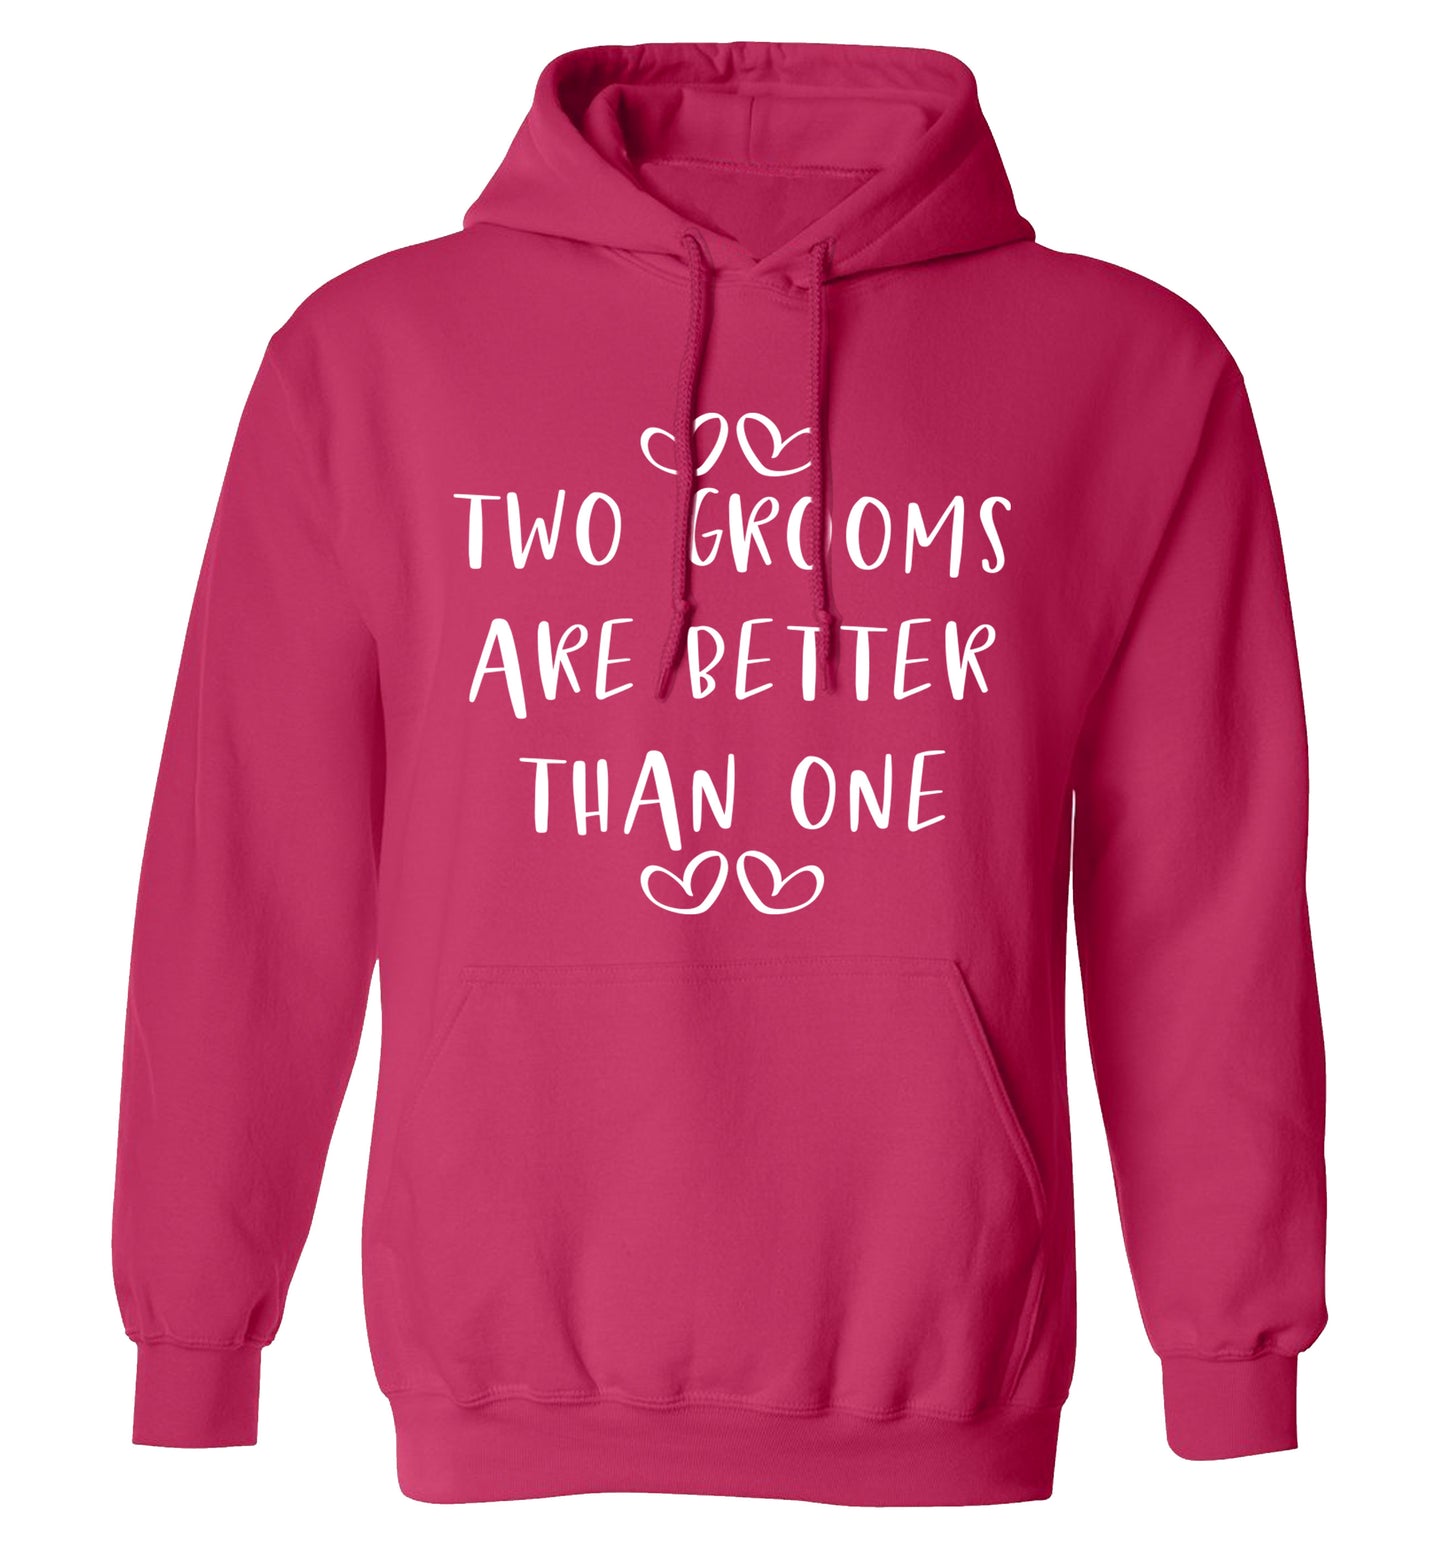 Two grooms are better than one adults unisex pink hoodie 2XL